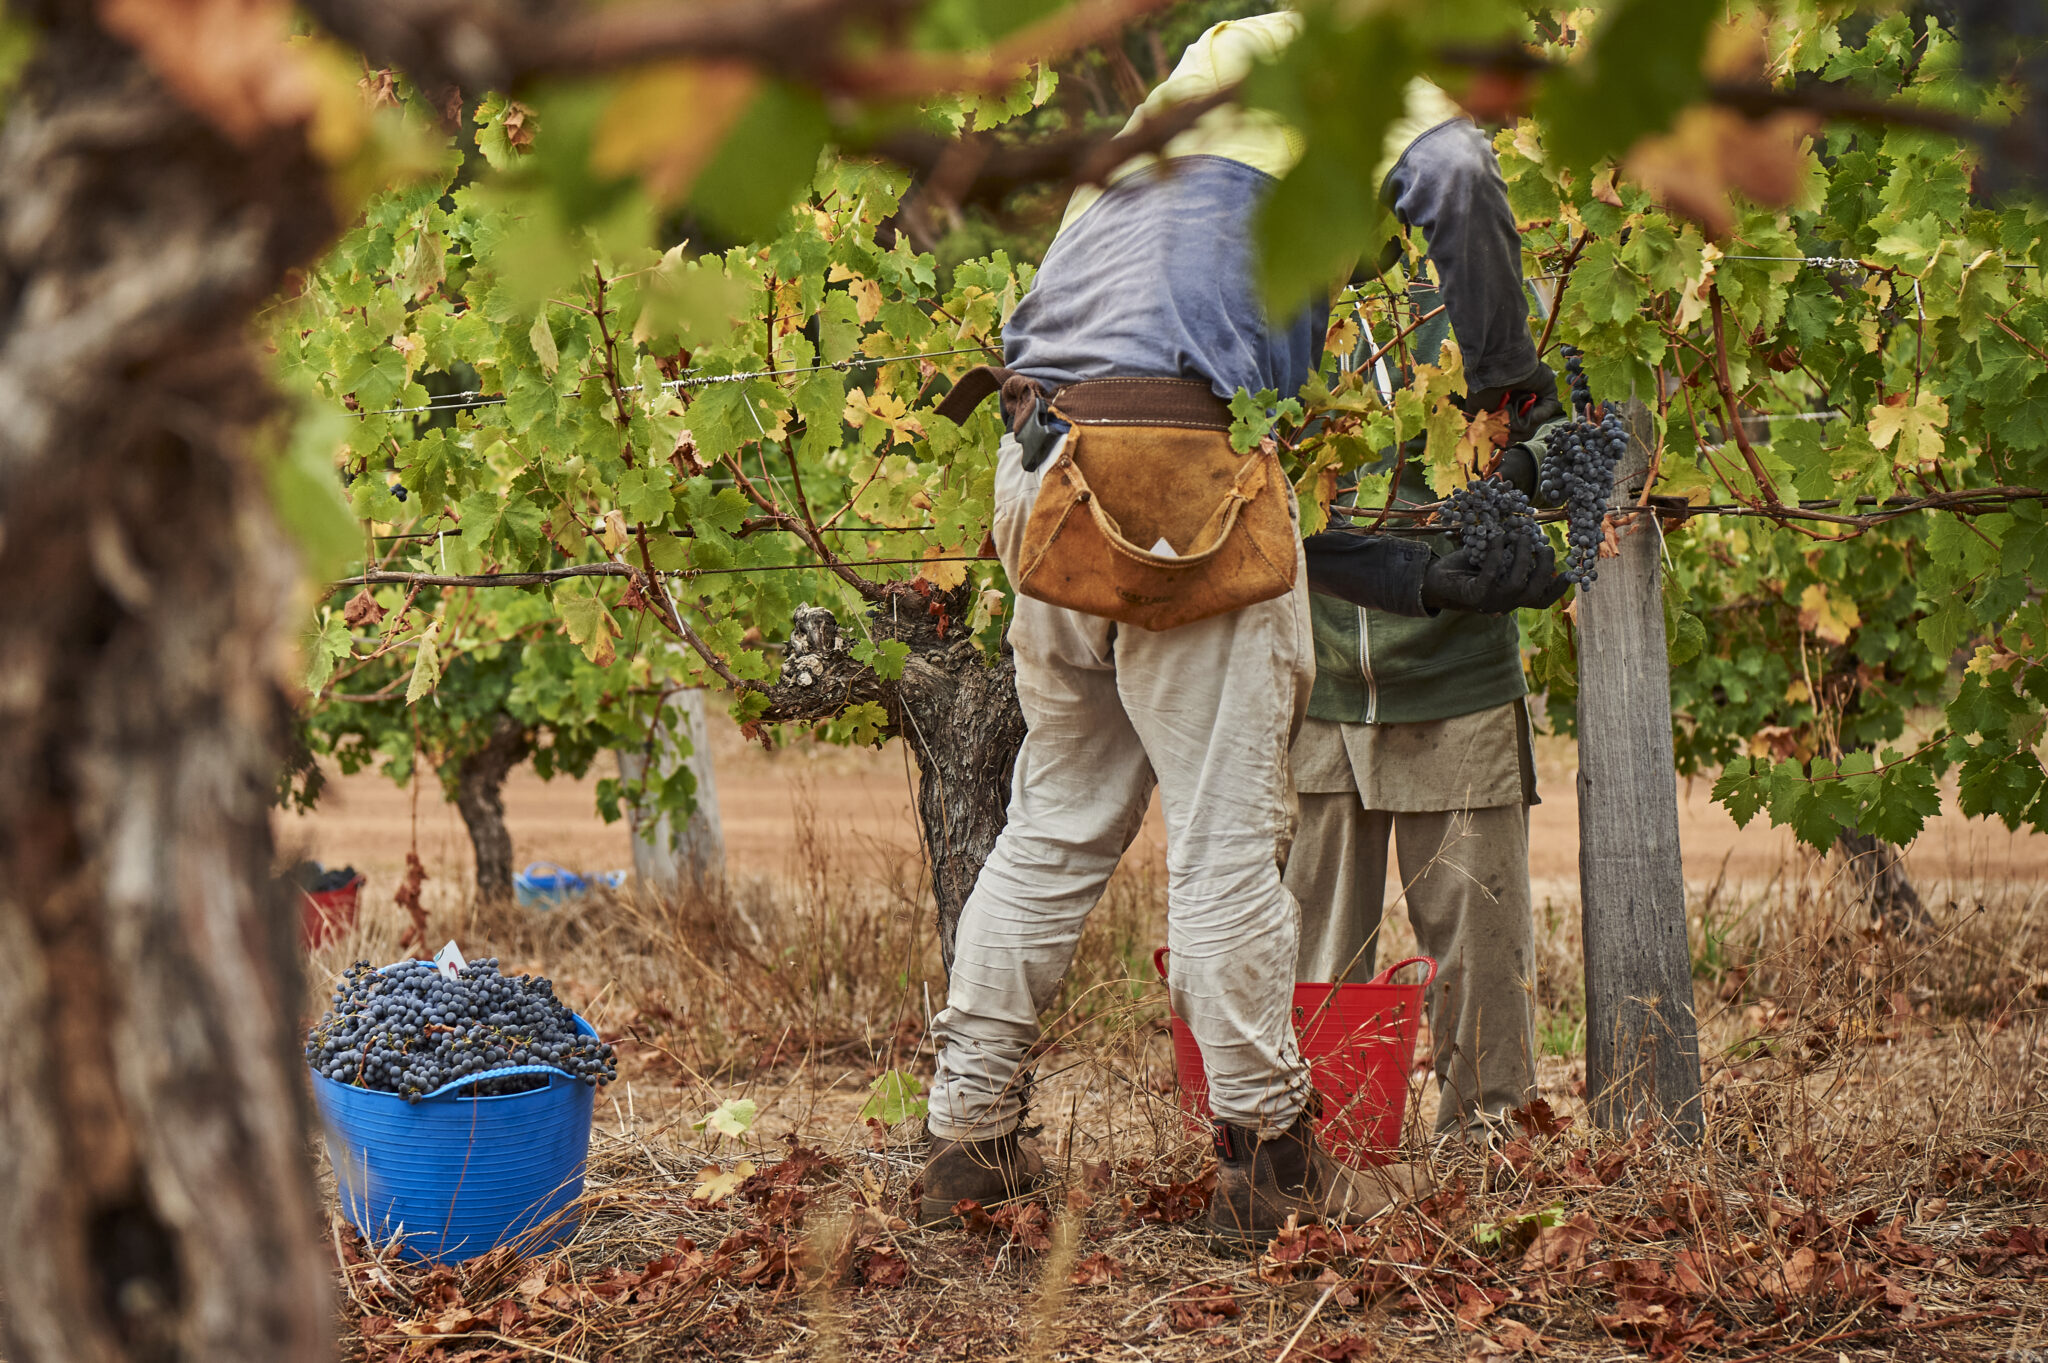 Moss Wood workers picking grapes in the vineyard